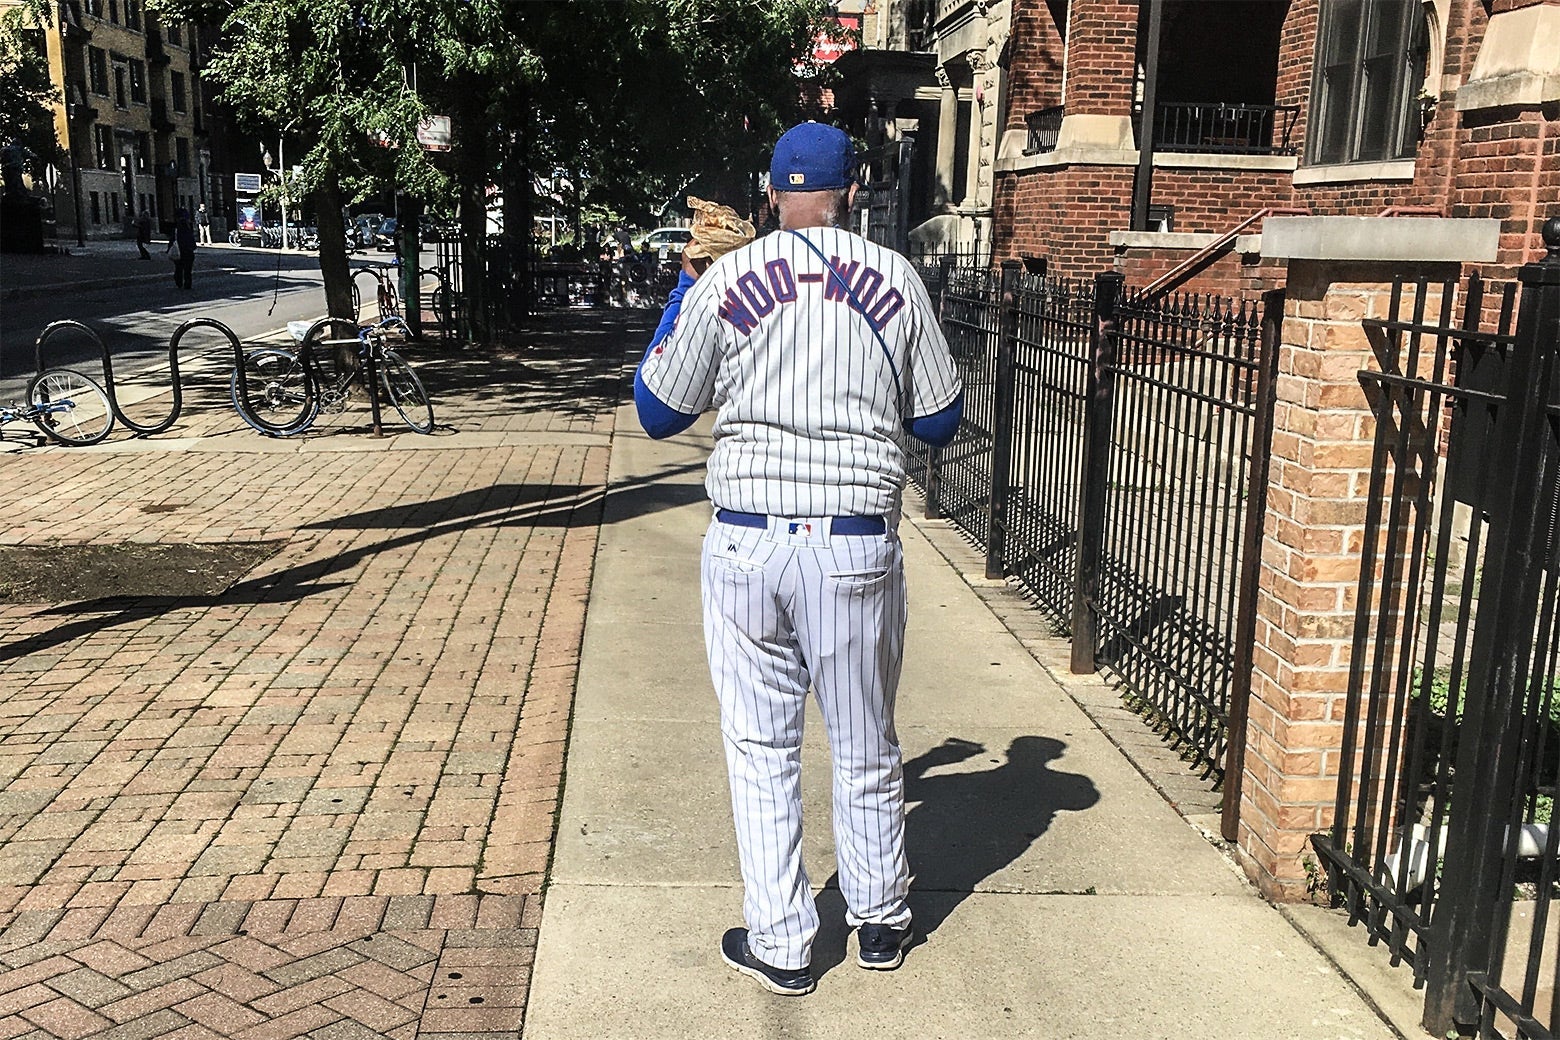 Man standing on a sidewalk, wearing a baseball uniform with the name WOO-WOO on the back